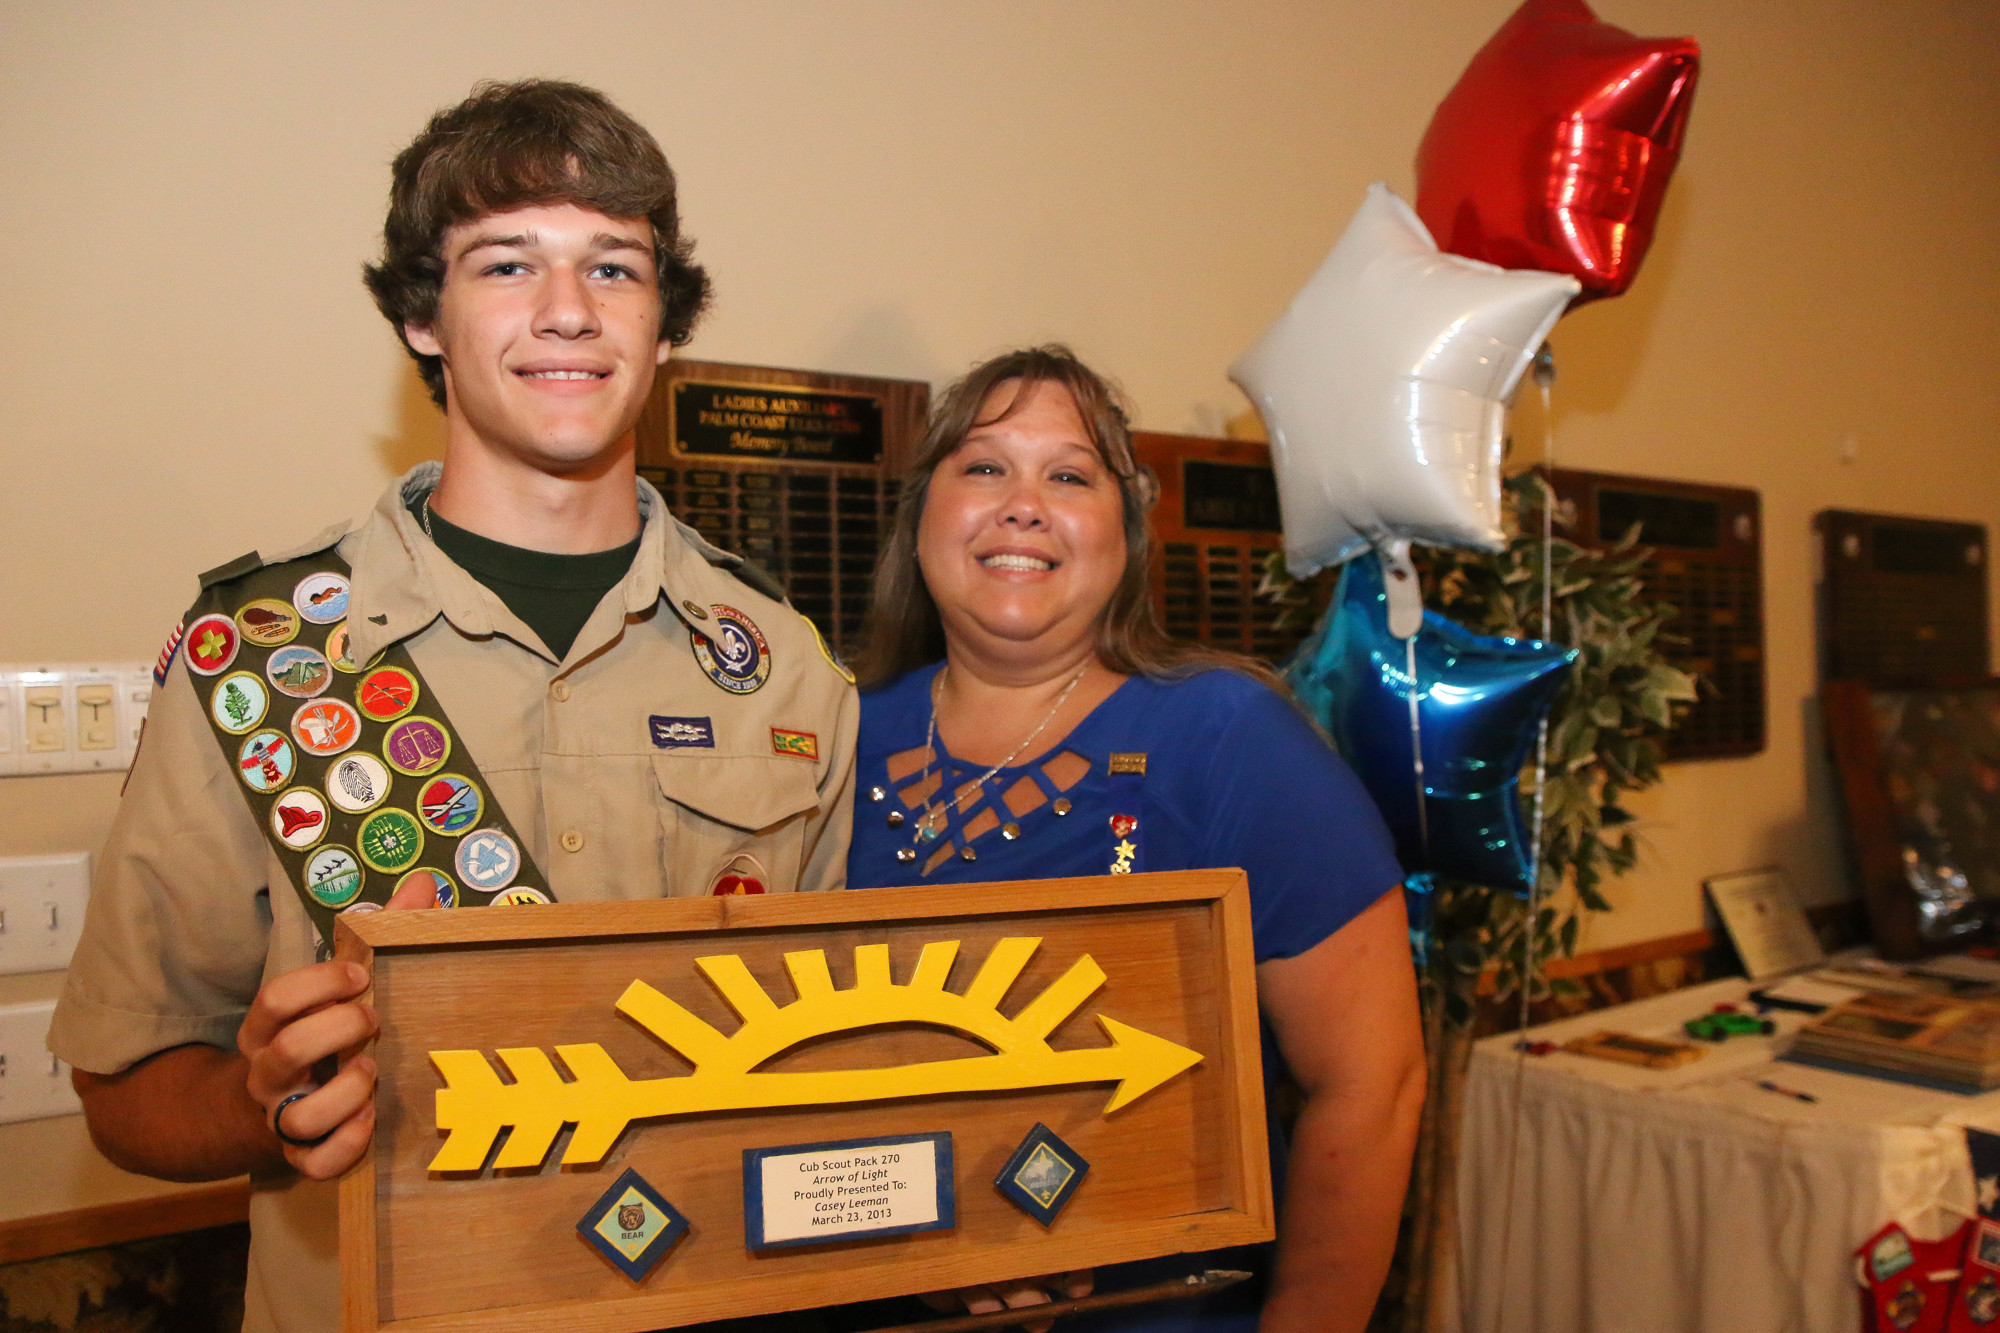 Casey Leeman stands with his mom, Lisa Leeman, at the Eagle Scout ceremony. Photo by Paige Wilson